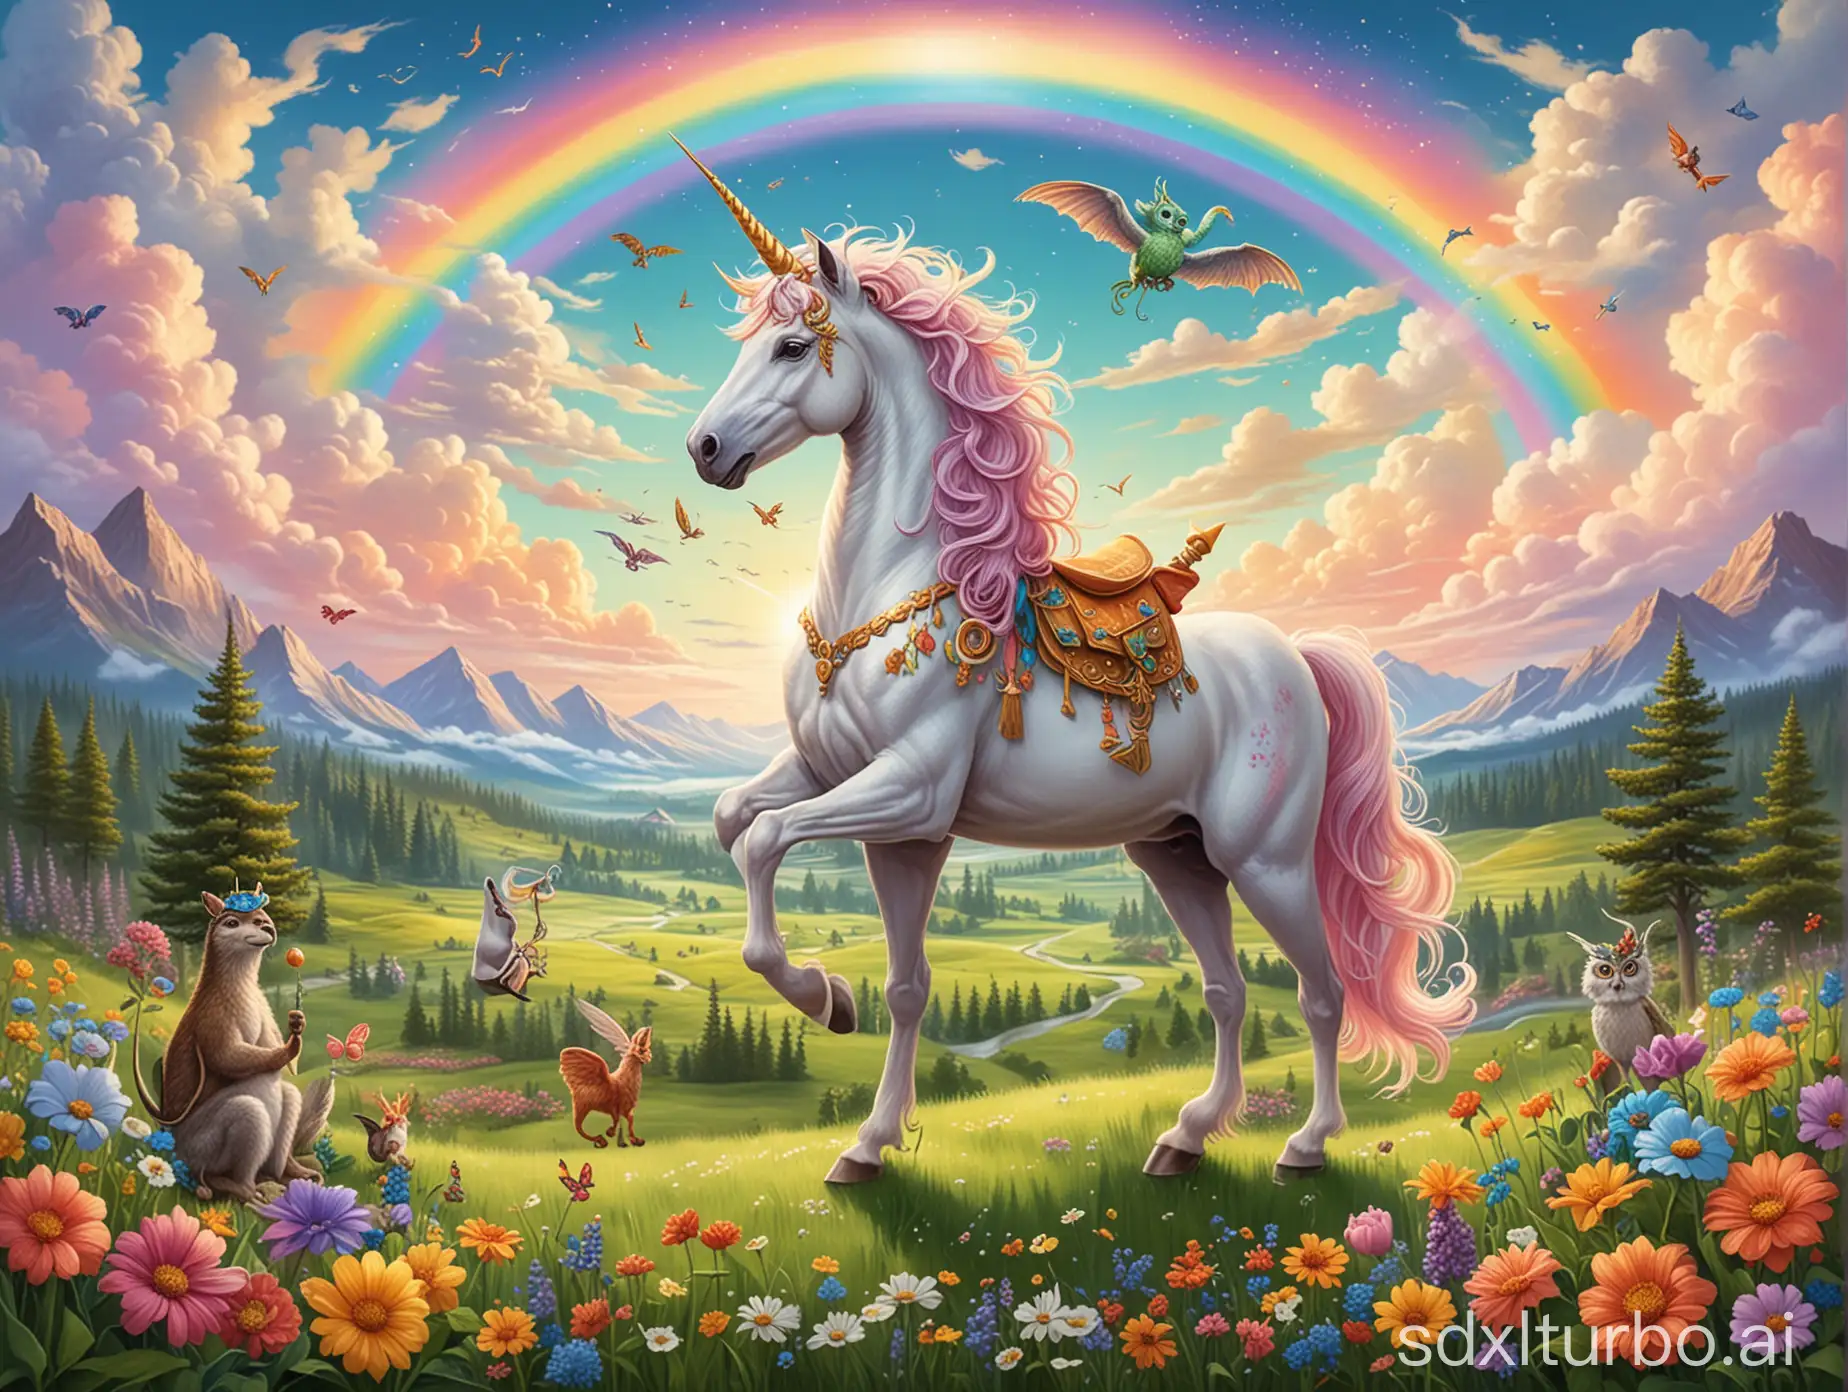 Enchanting-Gathering-of-Mythical-Creatures-in-Pastel-Meadow